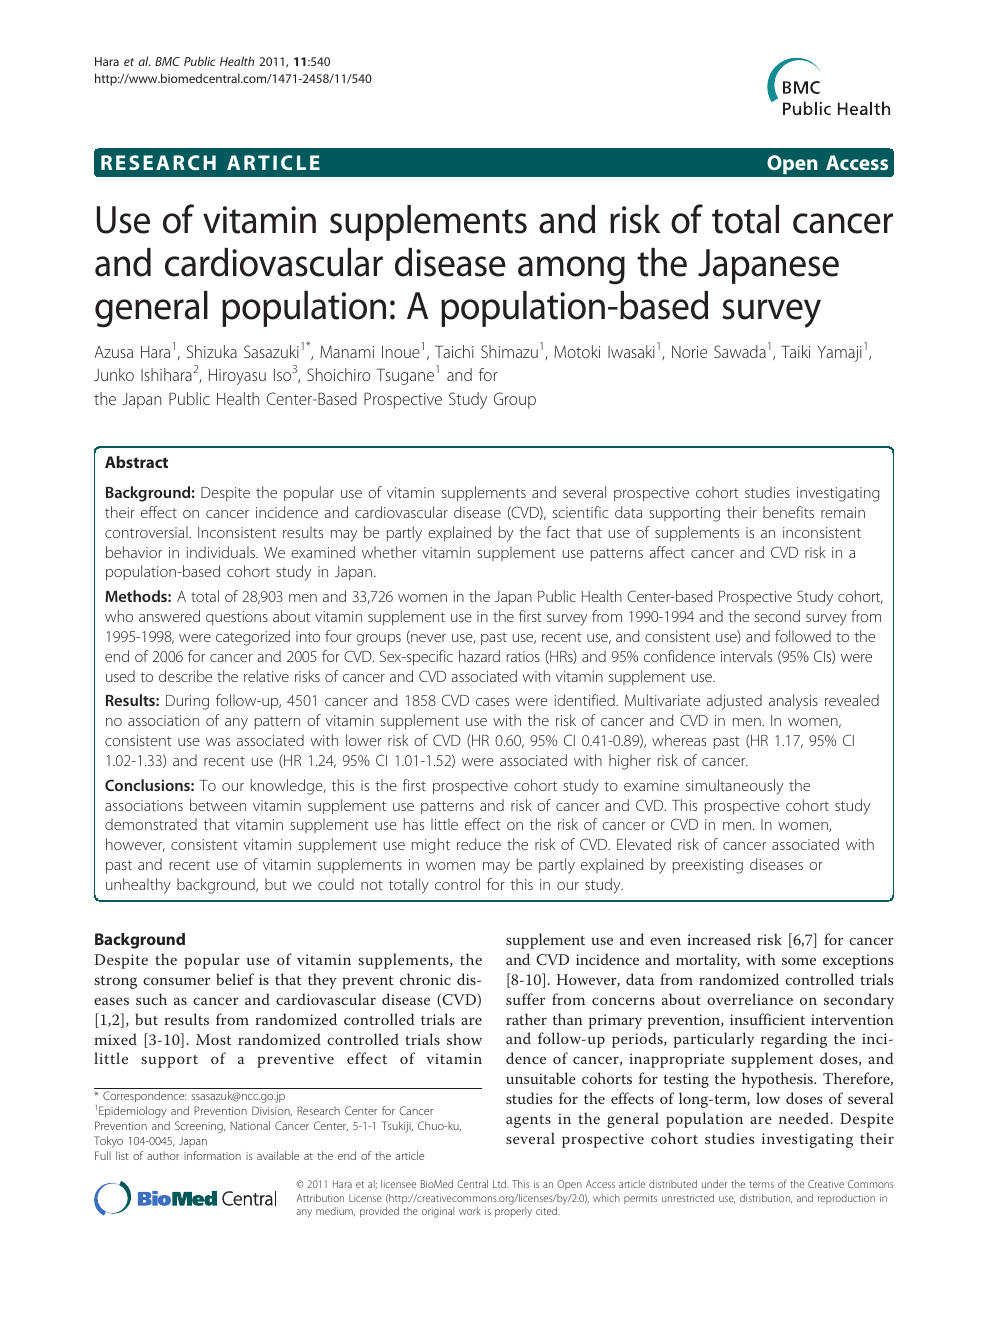 Use of vitamin supplements and risk of total cancer and cardiovascular disease among the Japanese general population A population-based survey